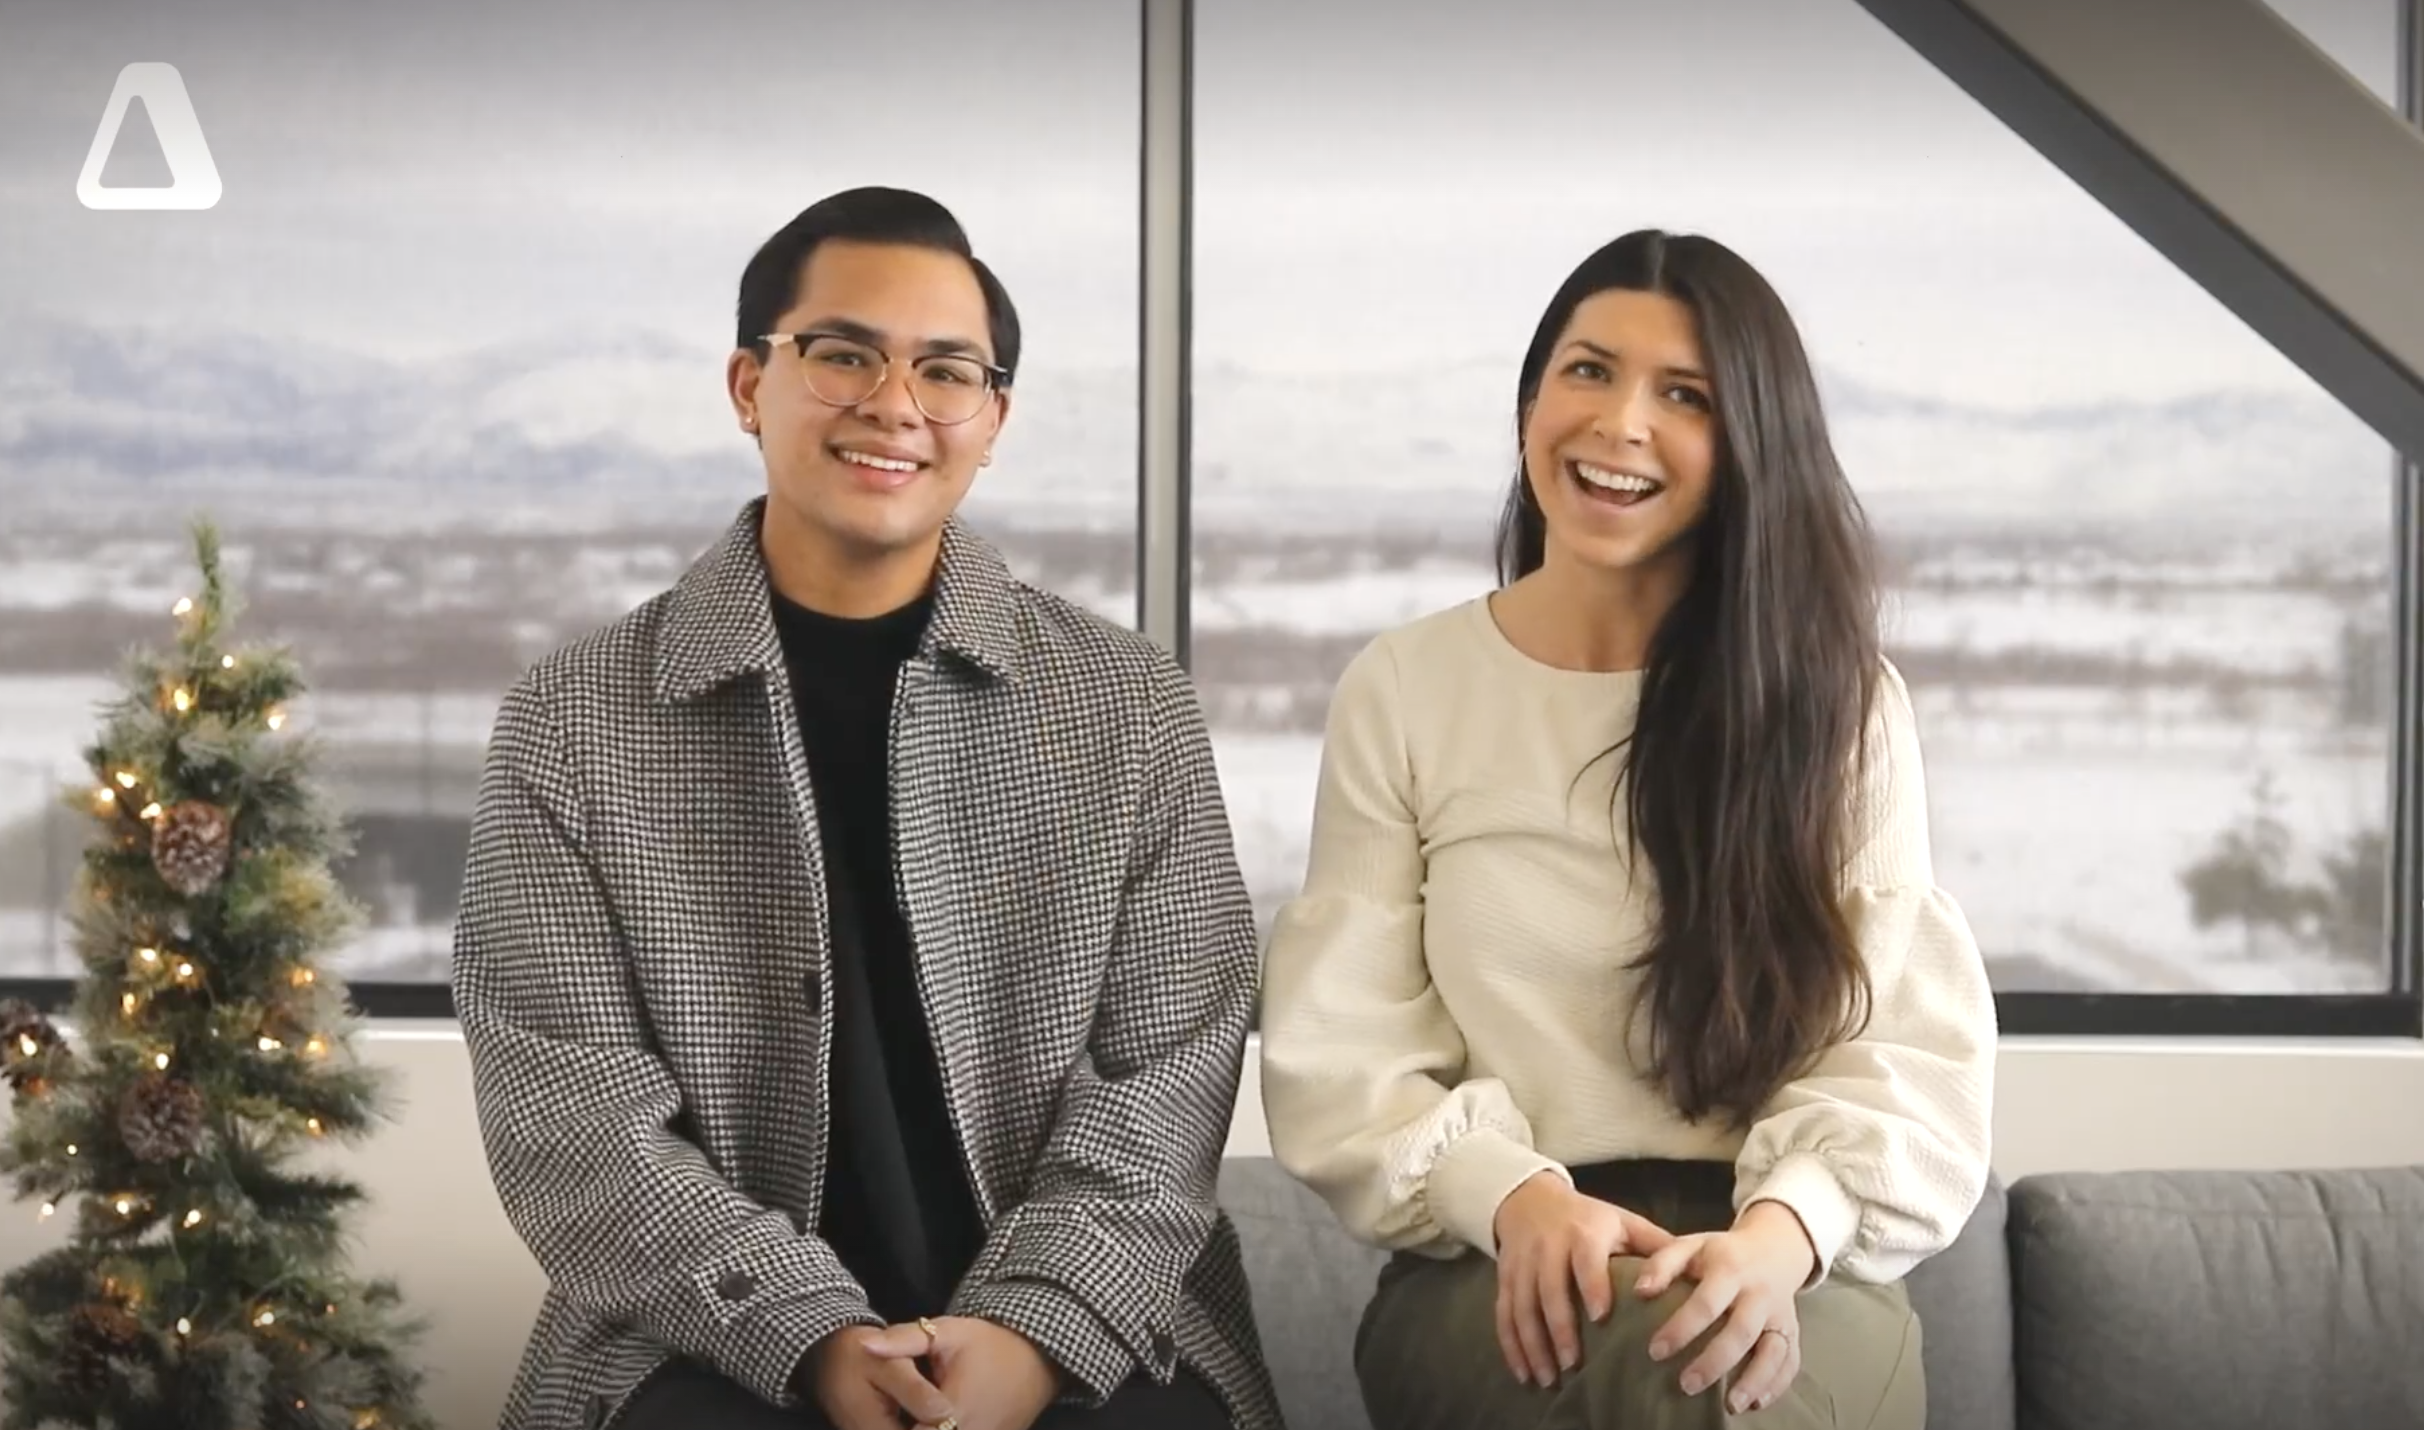 Watch: Happy Holidays from Canopy